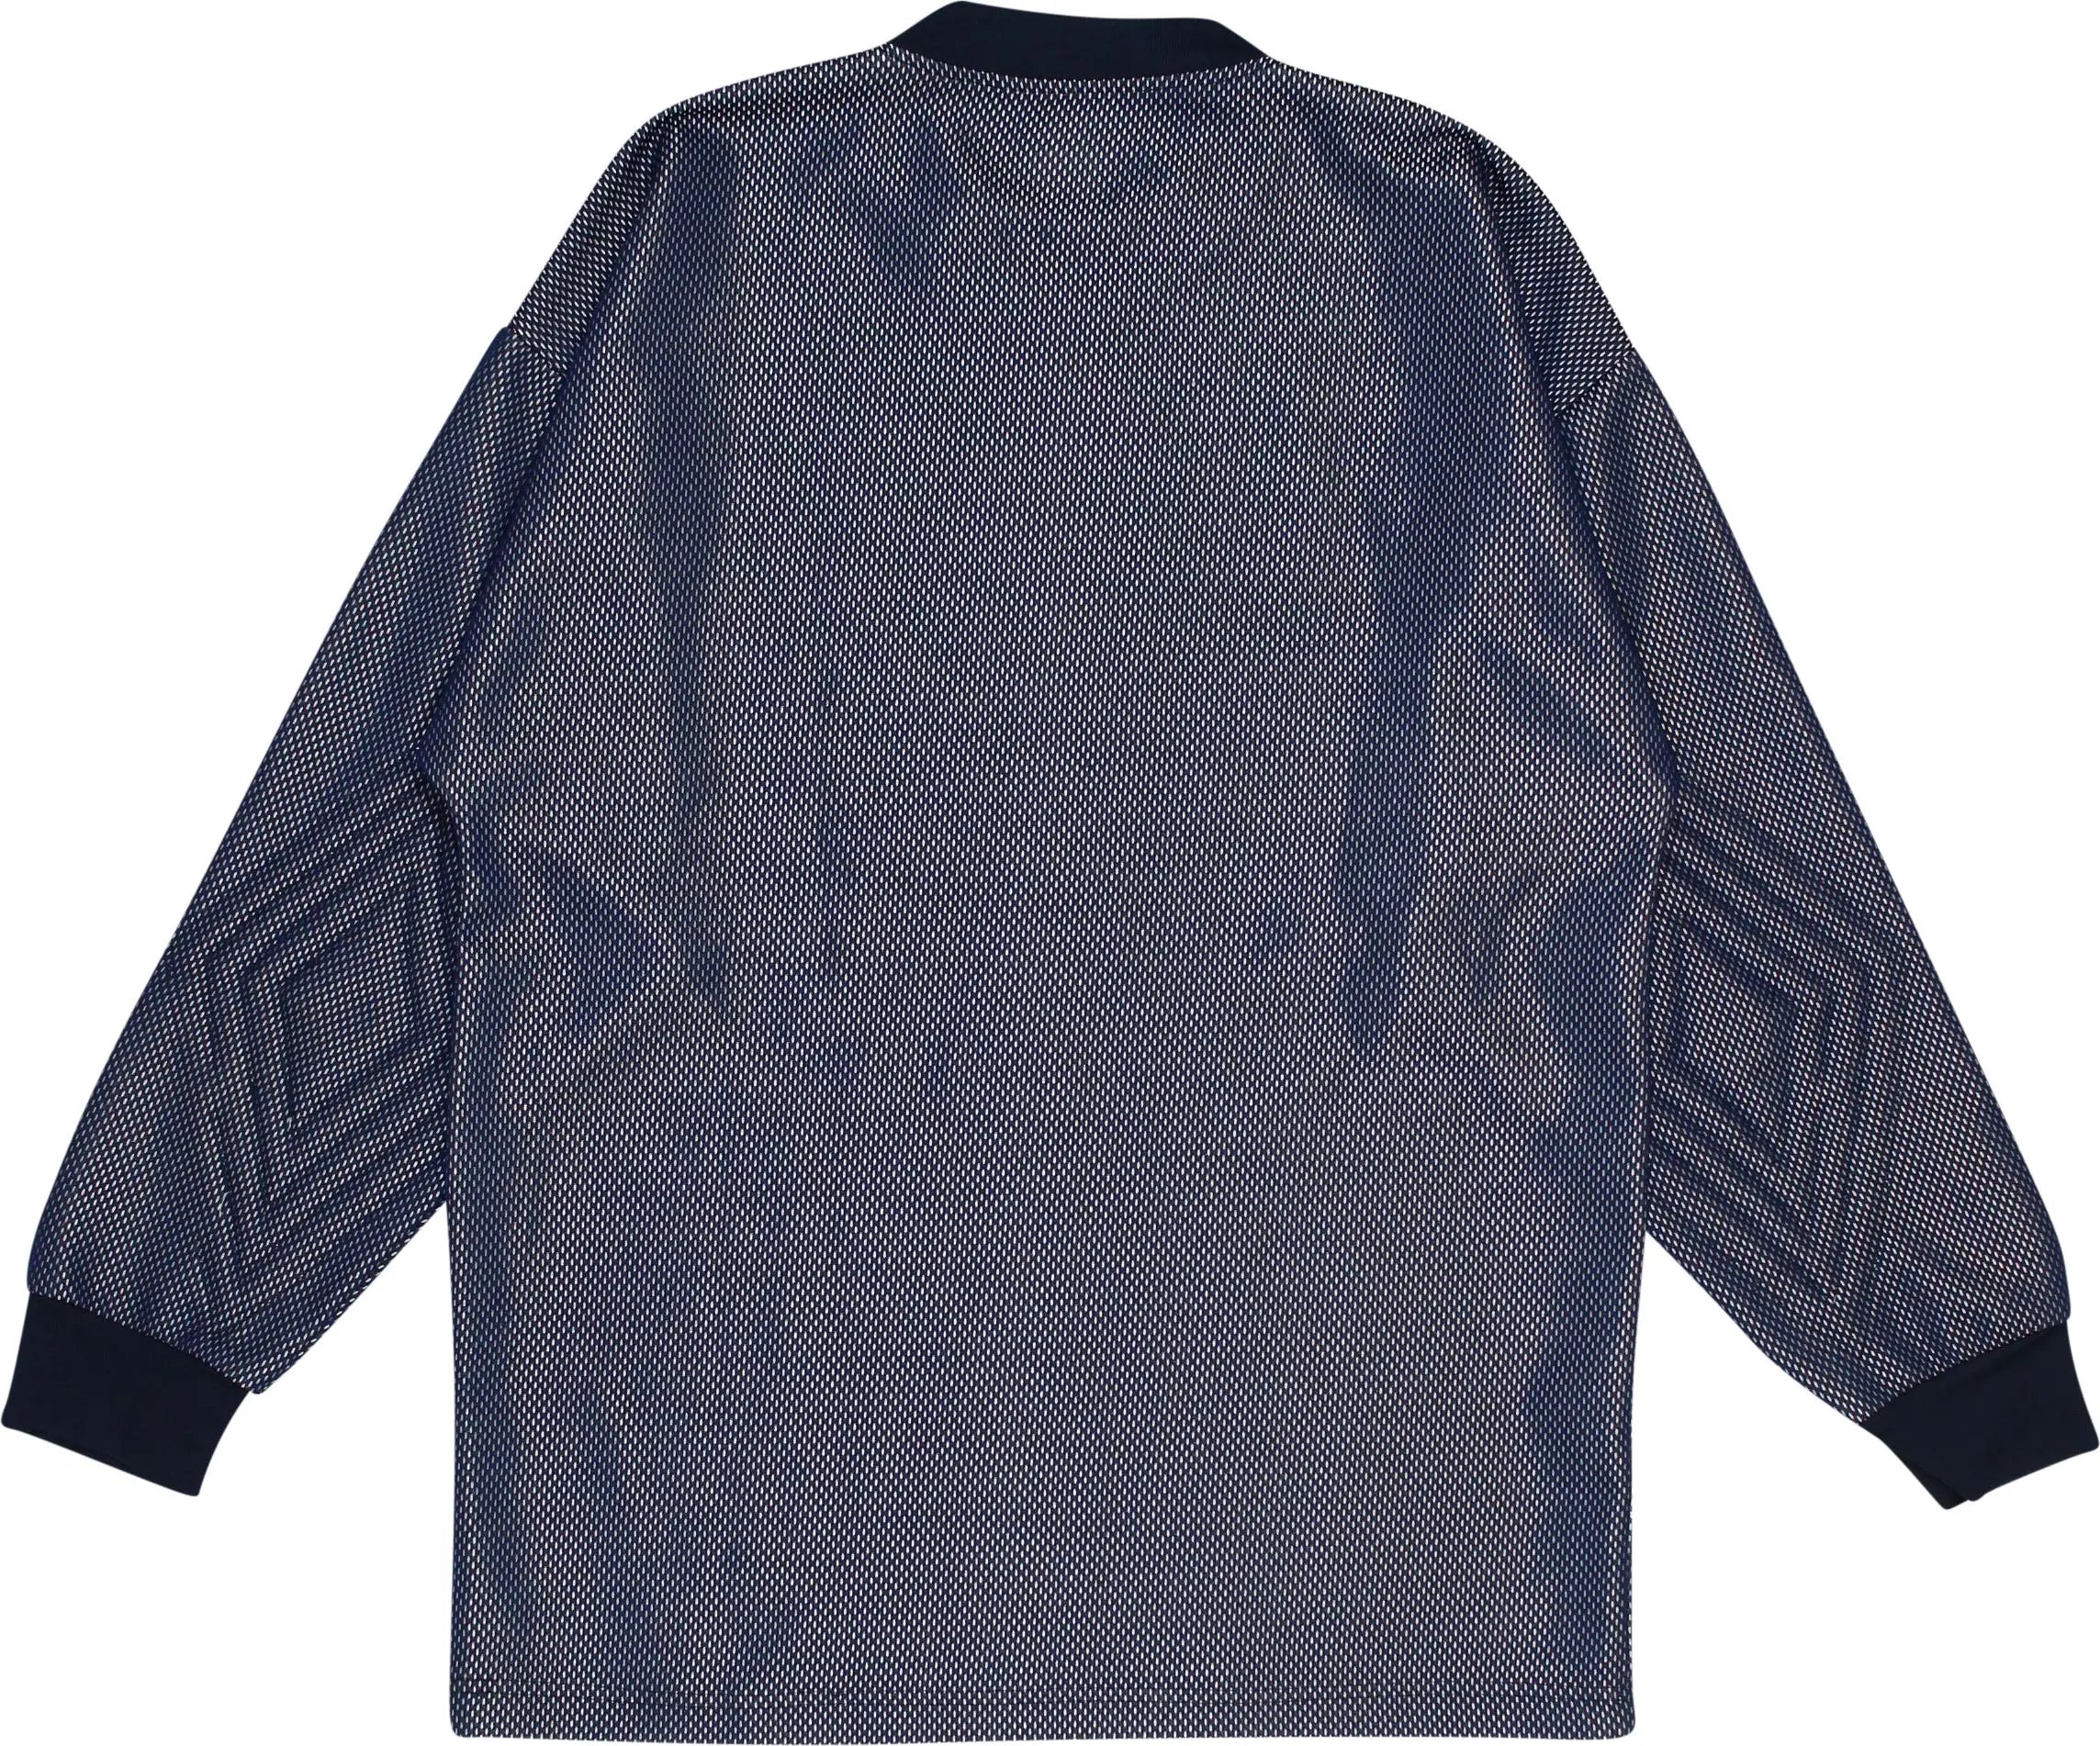 Umbro - Umbro Mesh Sweater- ThriftTale.com - Vintage and second handclothing